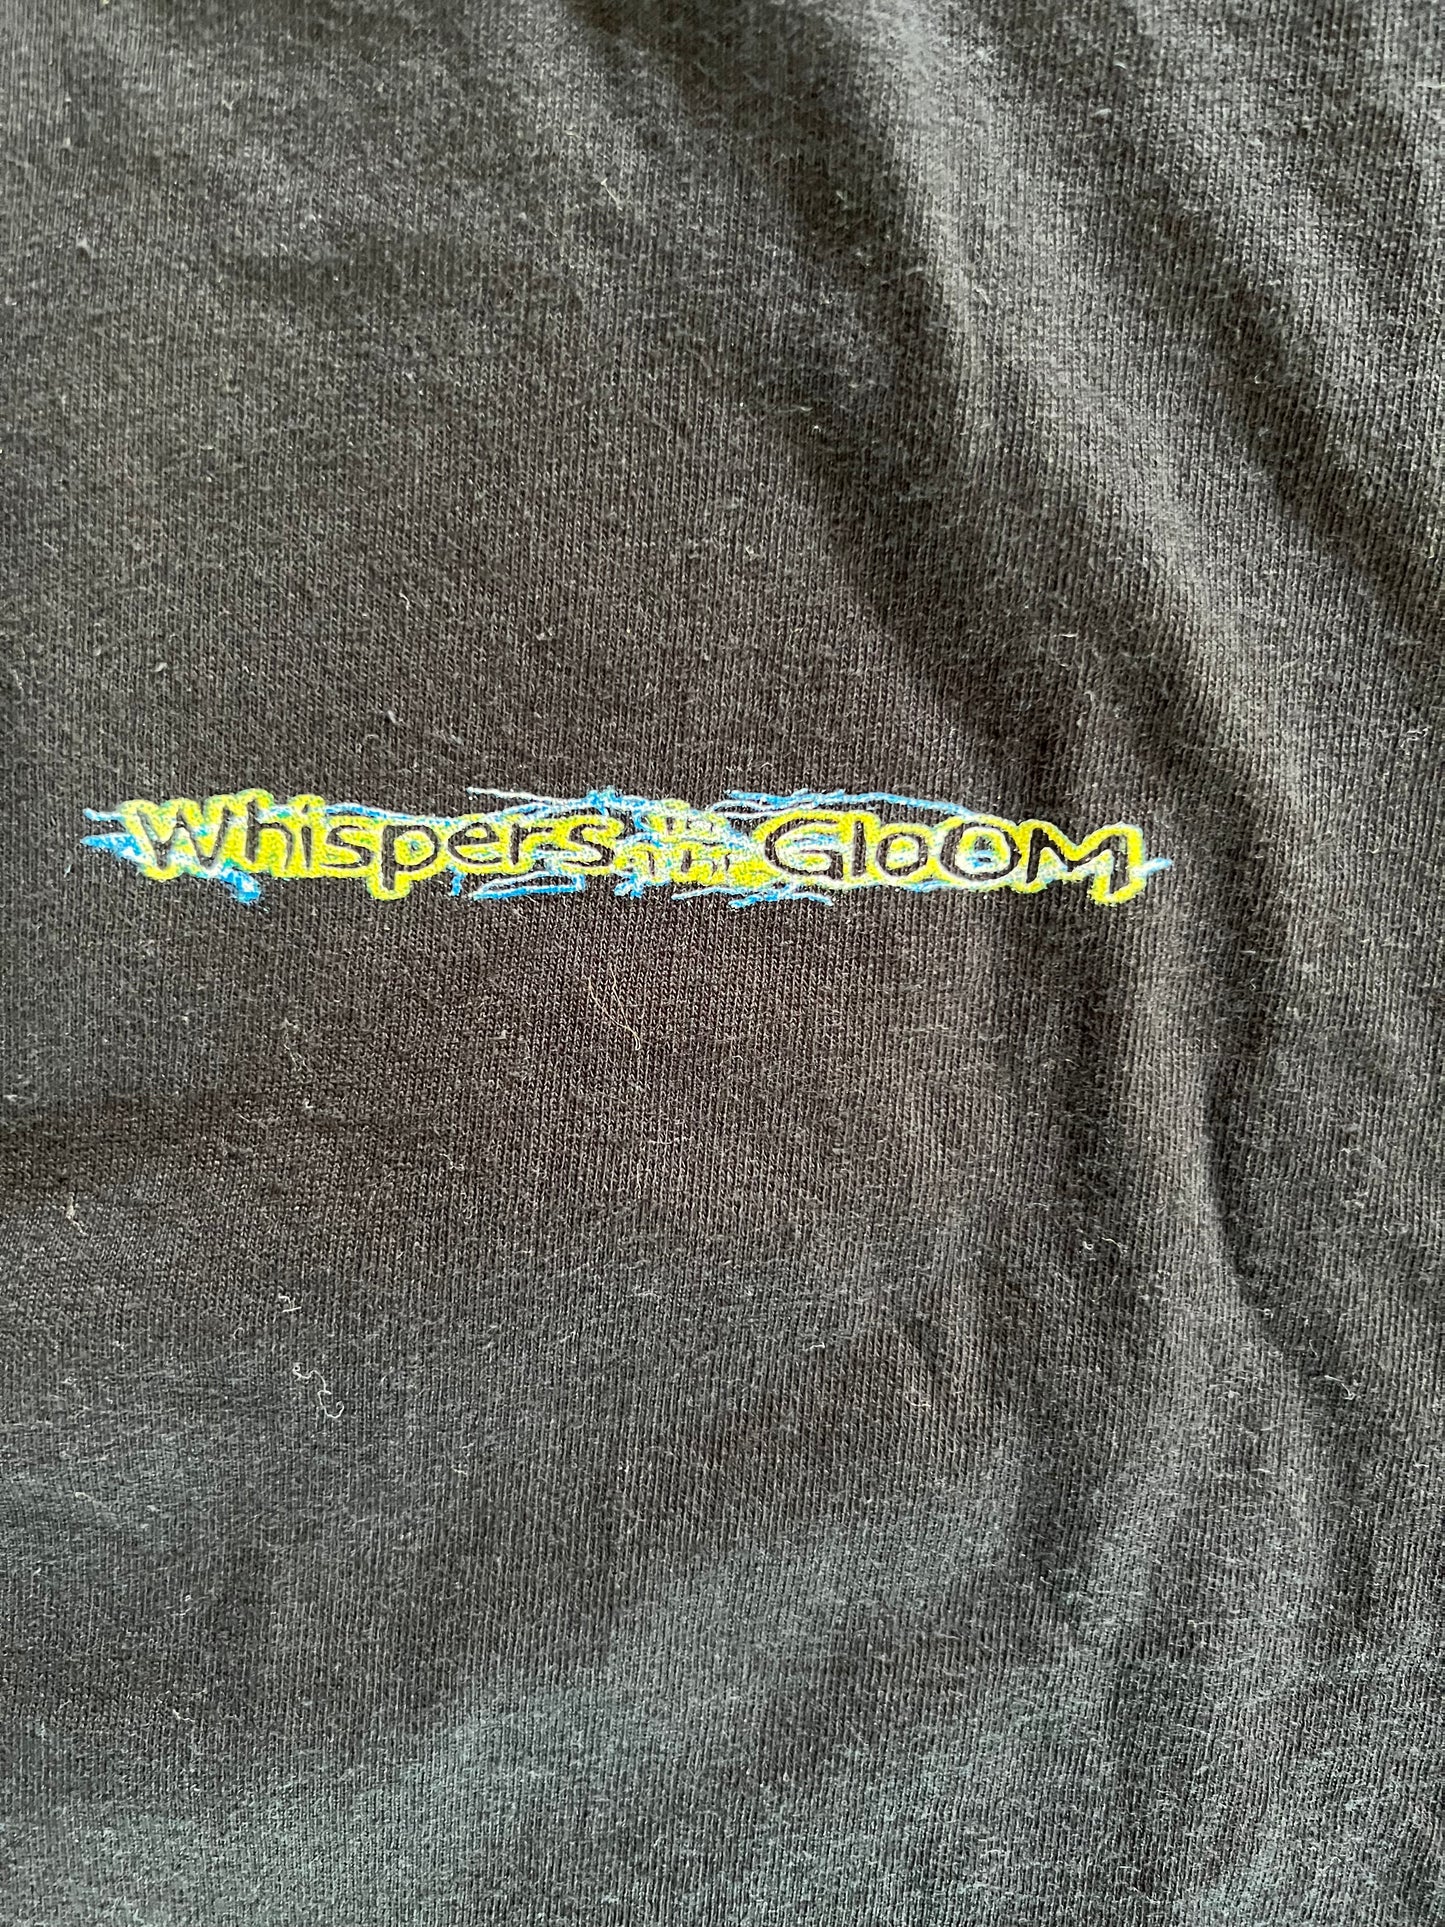 WHISPERS IN THE GLOOM T-SHIRT